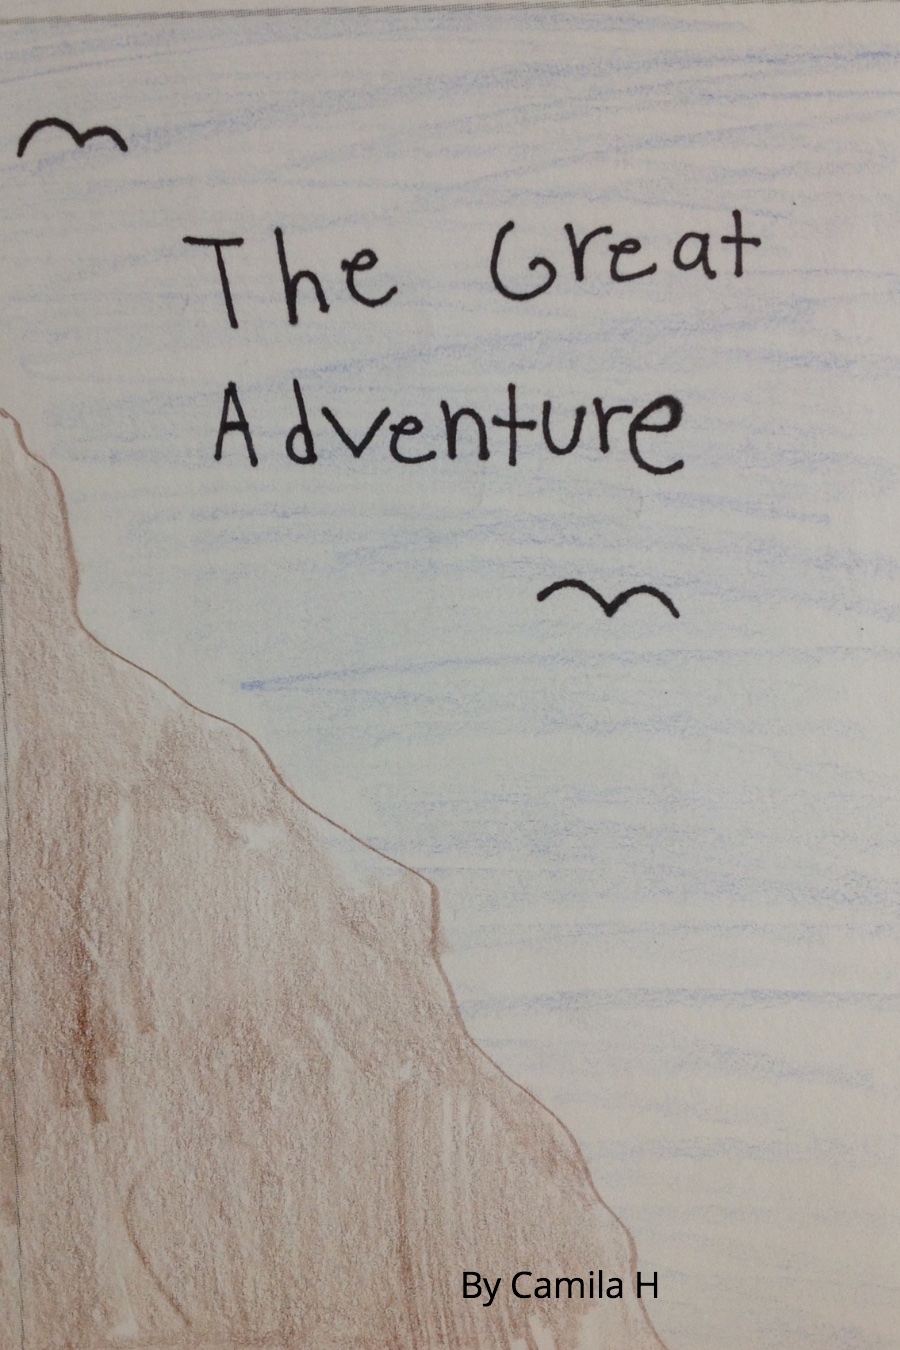 The Great Adventure by Camila H